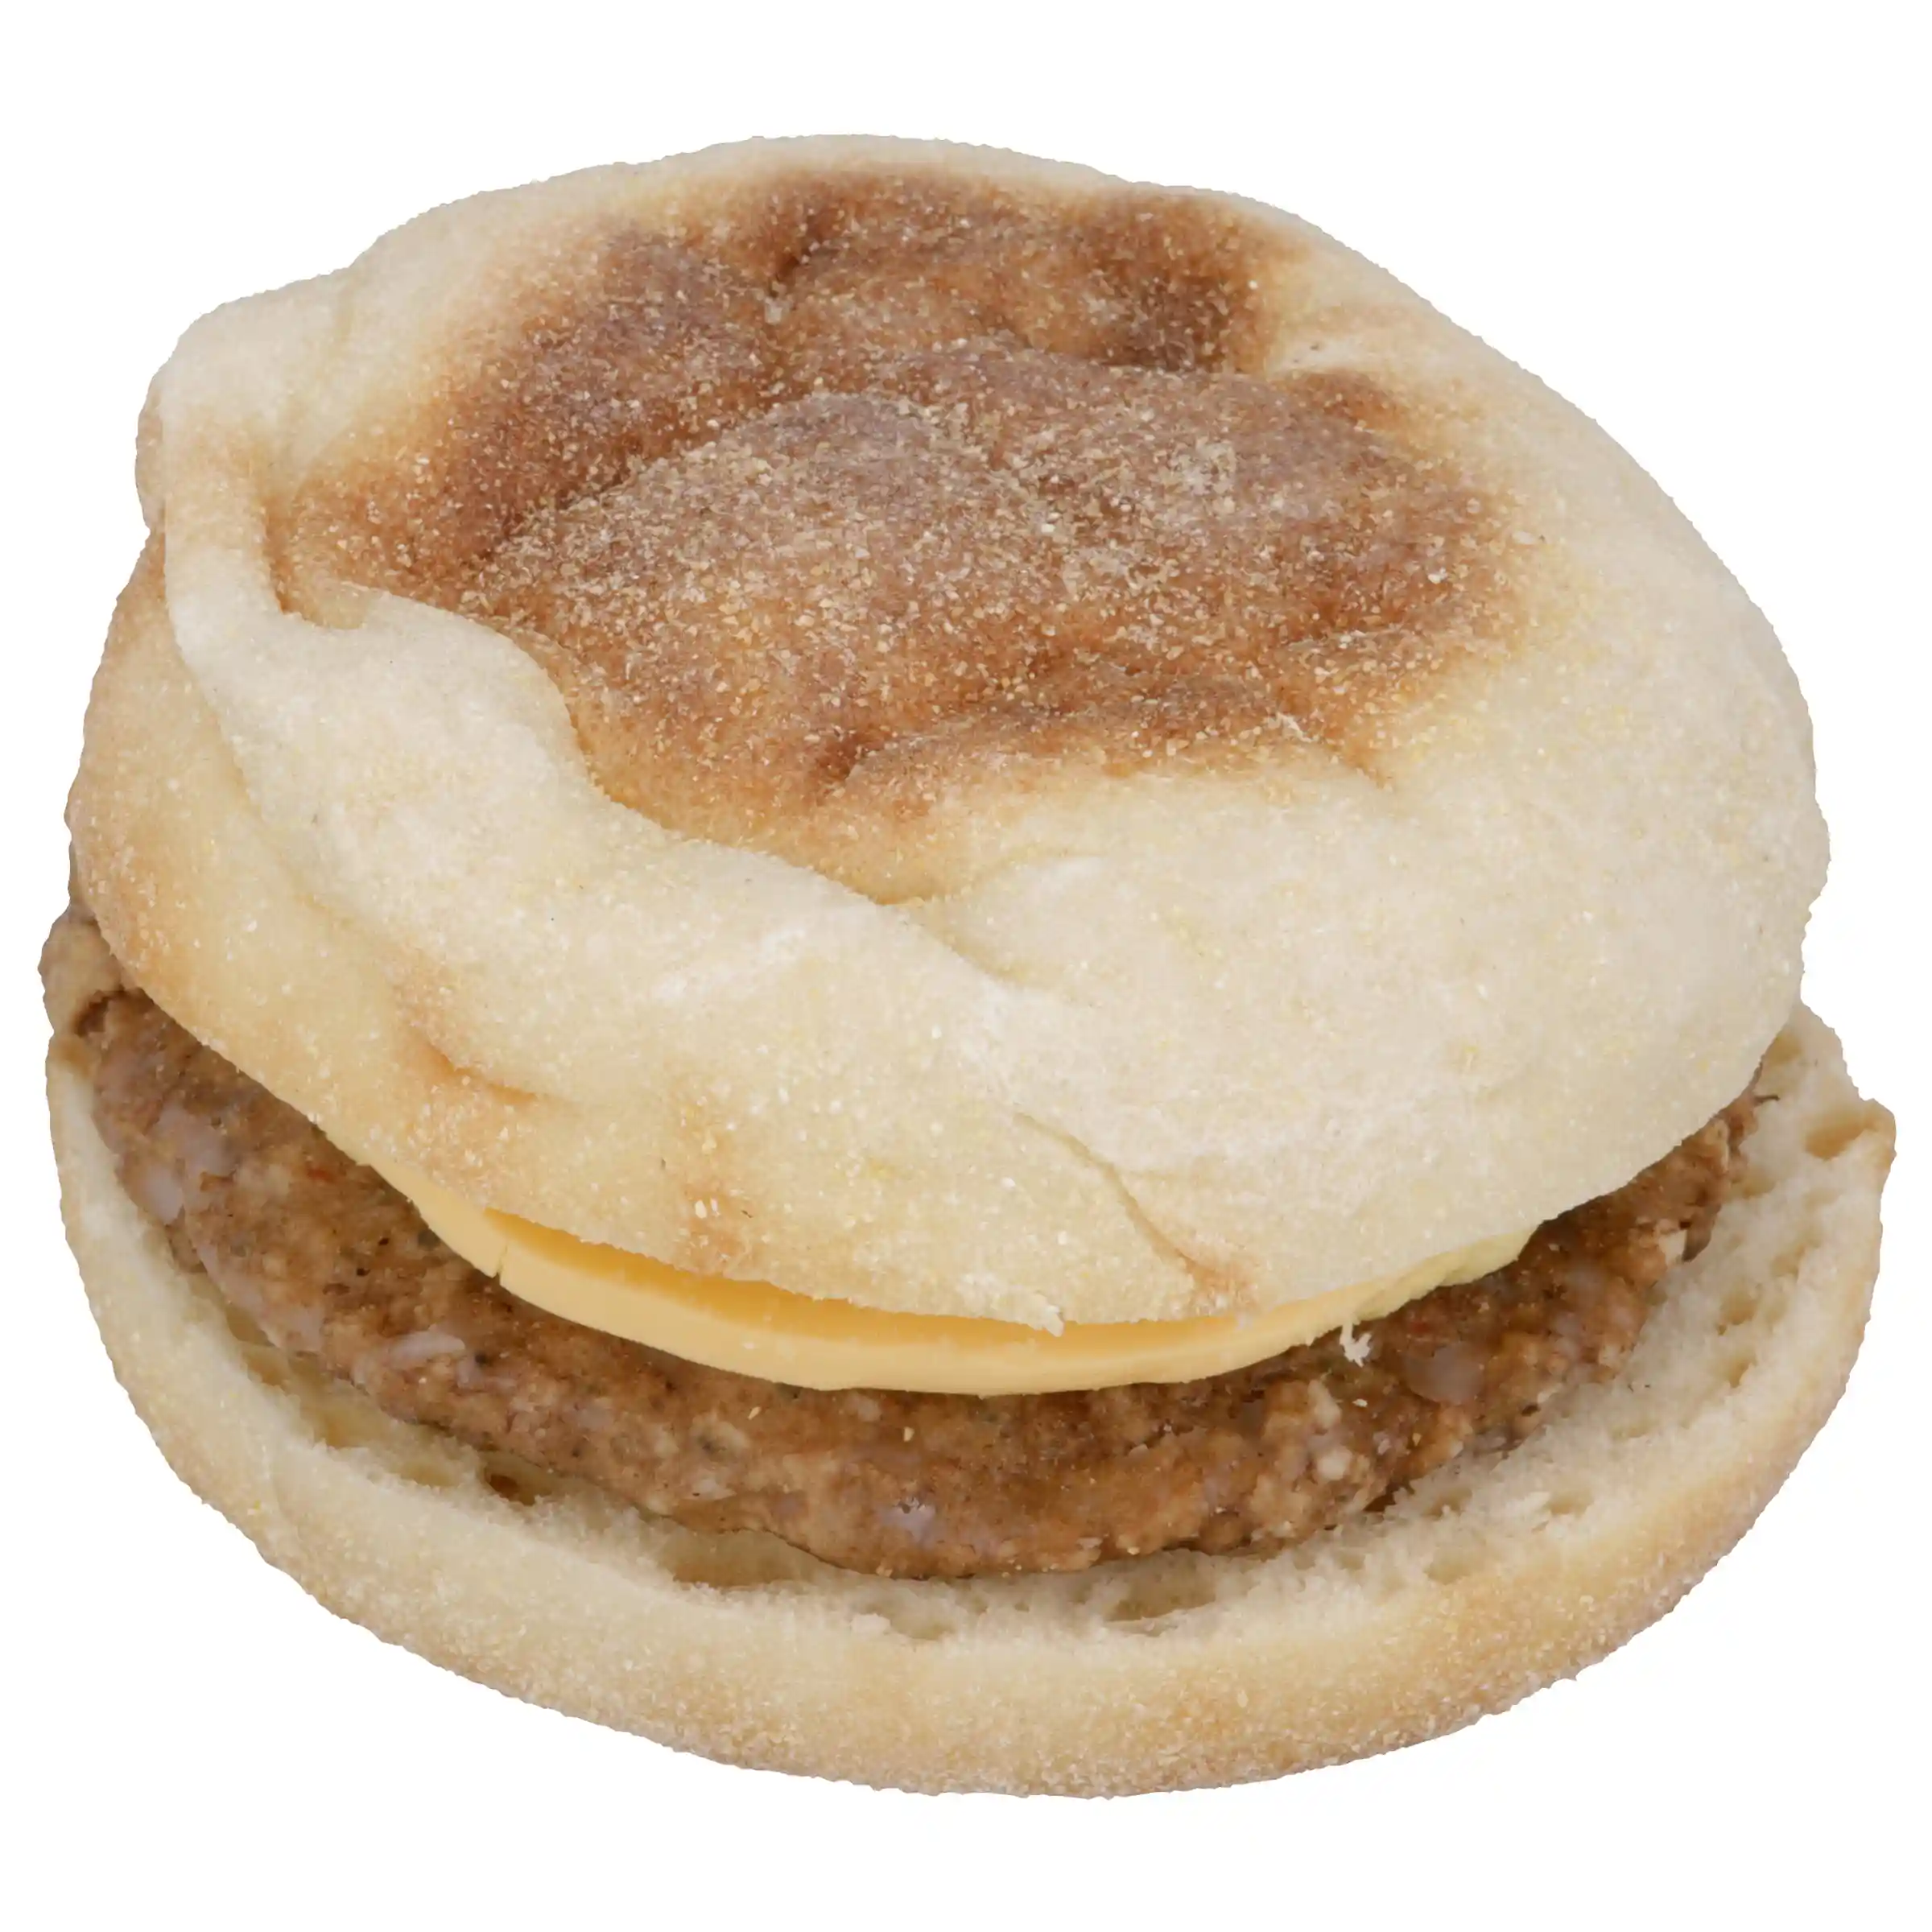 Jimmy Dean® Butcher Wrapped Sausage, Egg and Cheese Muffinhttps://images.salsify.com/image/upload/s--1DoZ5irz--/q_25/kmppcy1glwquz4frst17.webp